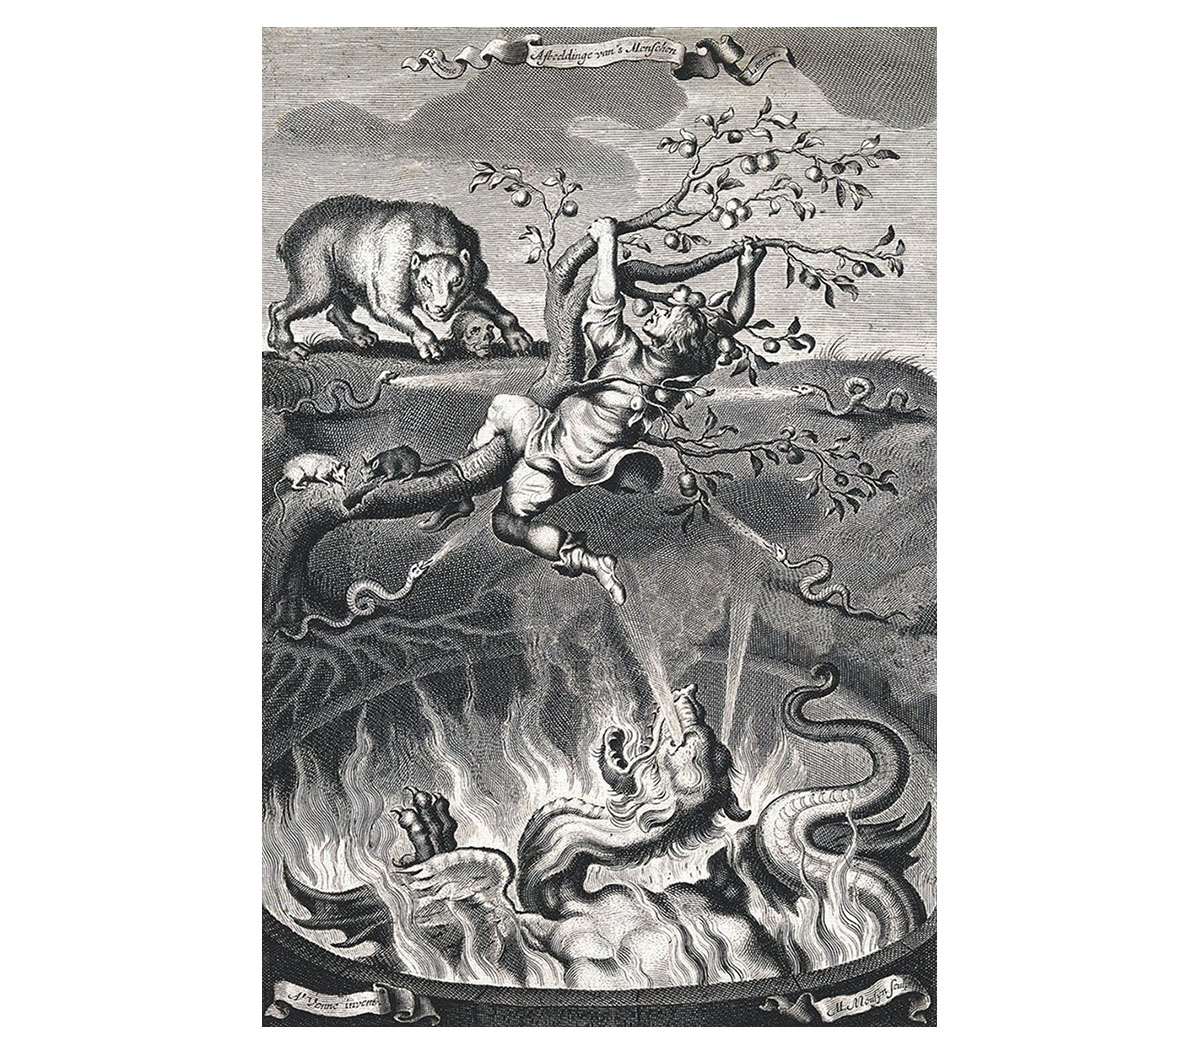 A man clings to a tree, struggling not to fall into a cauldron containing a monster while a bear and snakes look on and rats gnaw at the trunk of the tree.